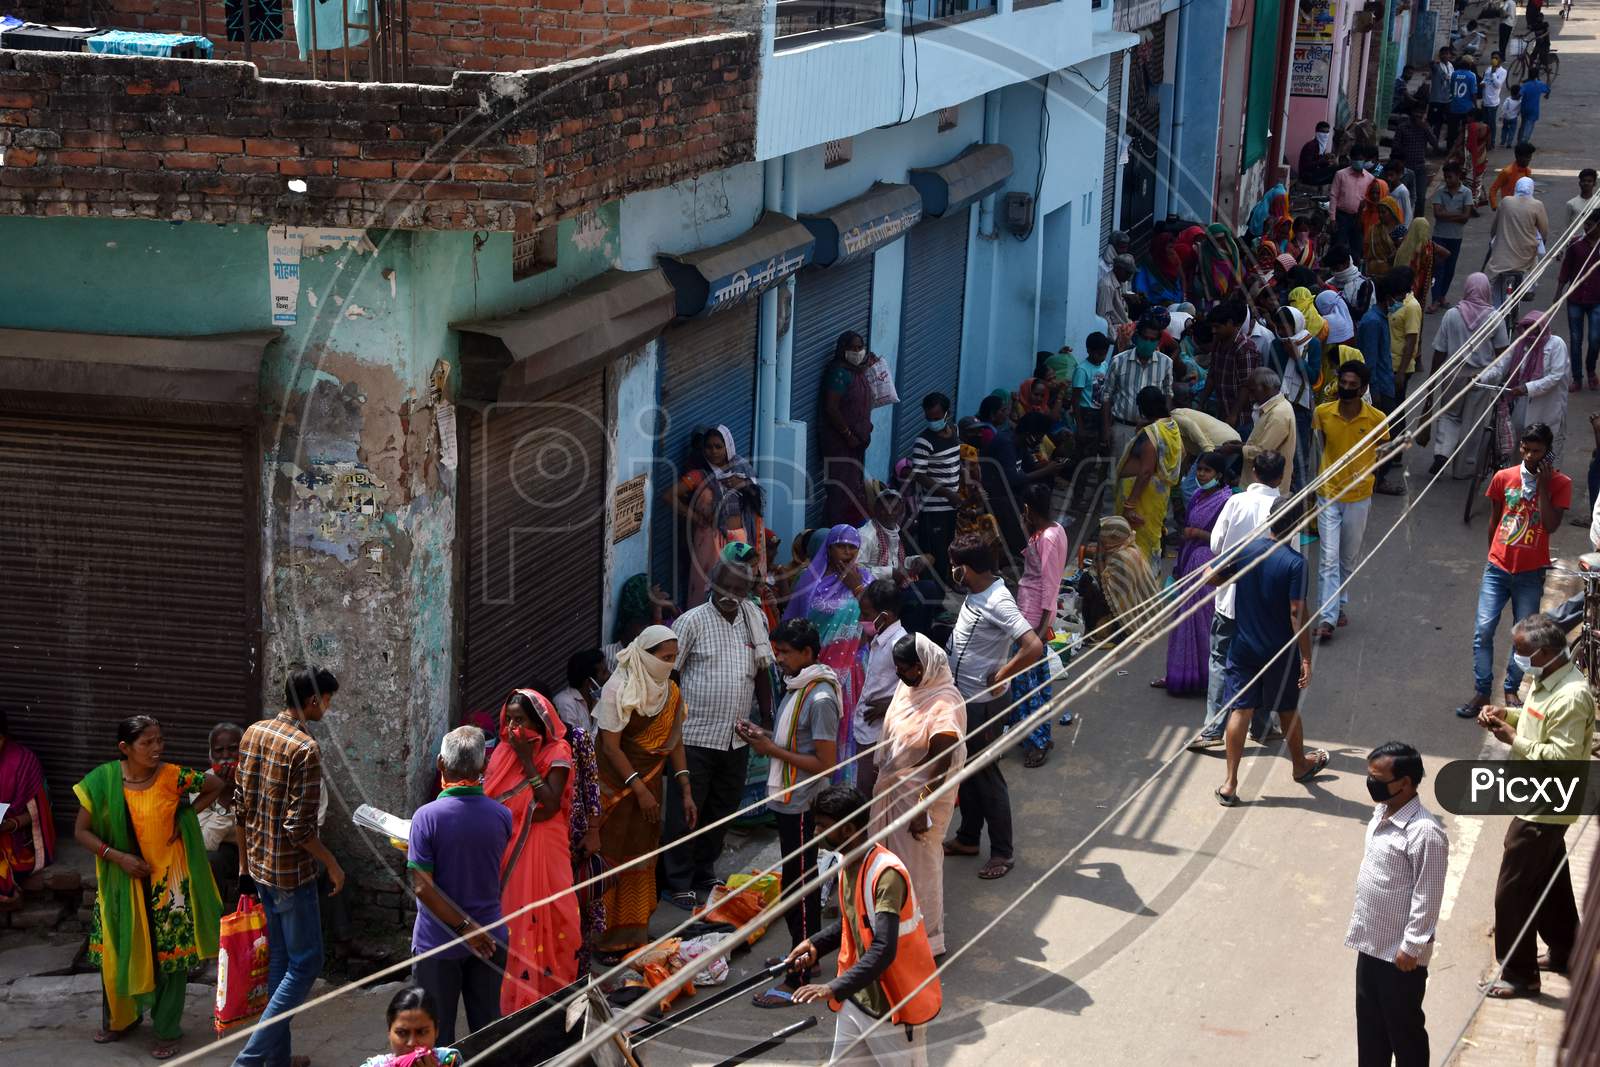 Beneficiaries Lined Up Outside A Ration Shop To Collect Free Food Grains From State Government Schemes To Poor People Amid The Complete Lockdown In The Wake Of The Cororavirus  or COVID-19 Pandemic, In Prayagraj, Wednesday, April 15, 2020.